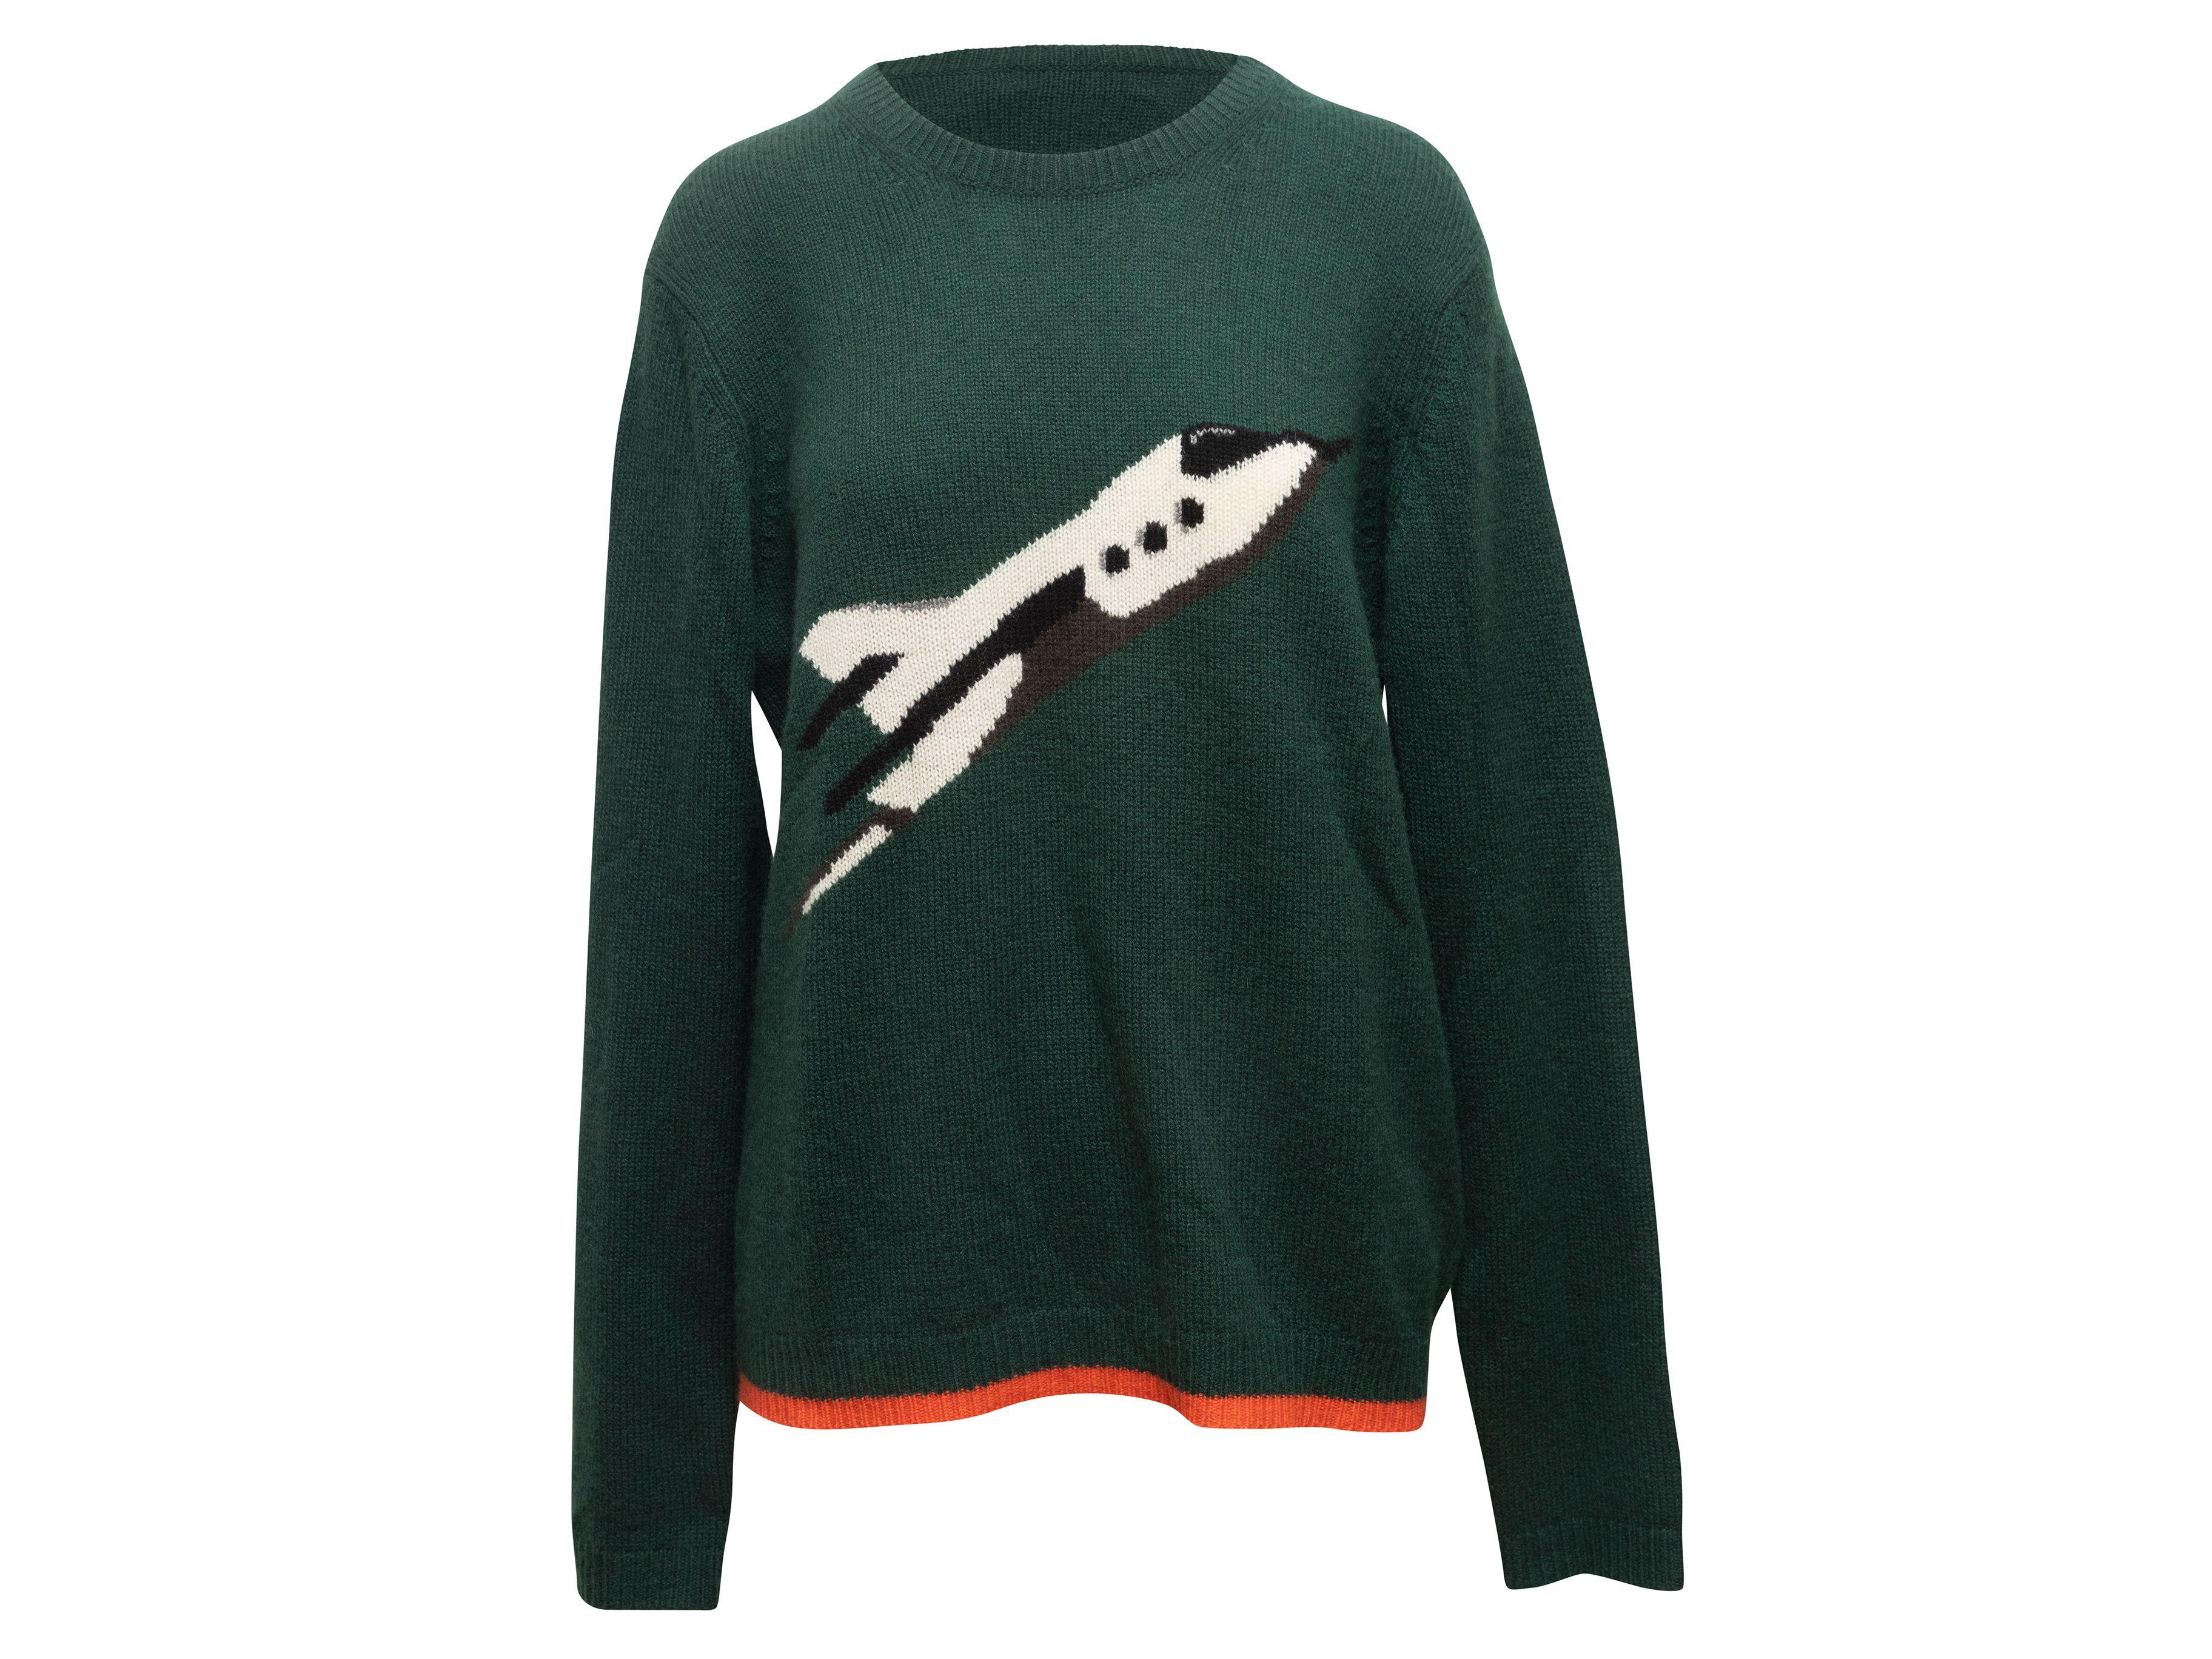 ﻿Product Details: Dark green and multicolor cashmere space shuttle motif sweater by Coach 1941. Crew neck. Long sleeves. 38